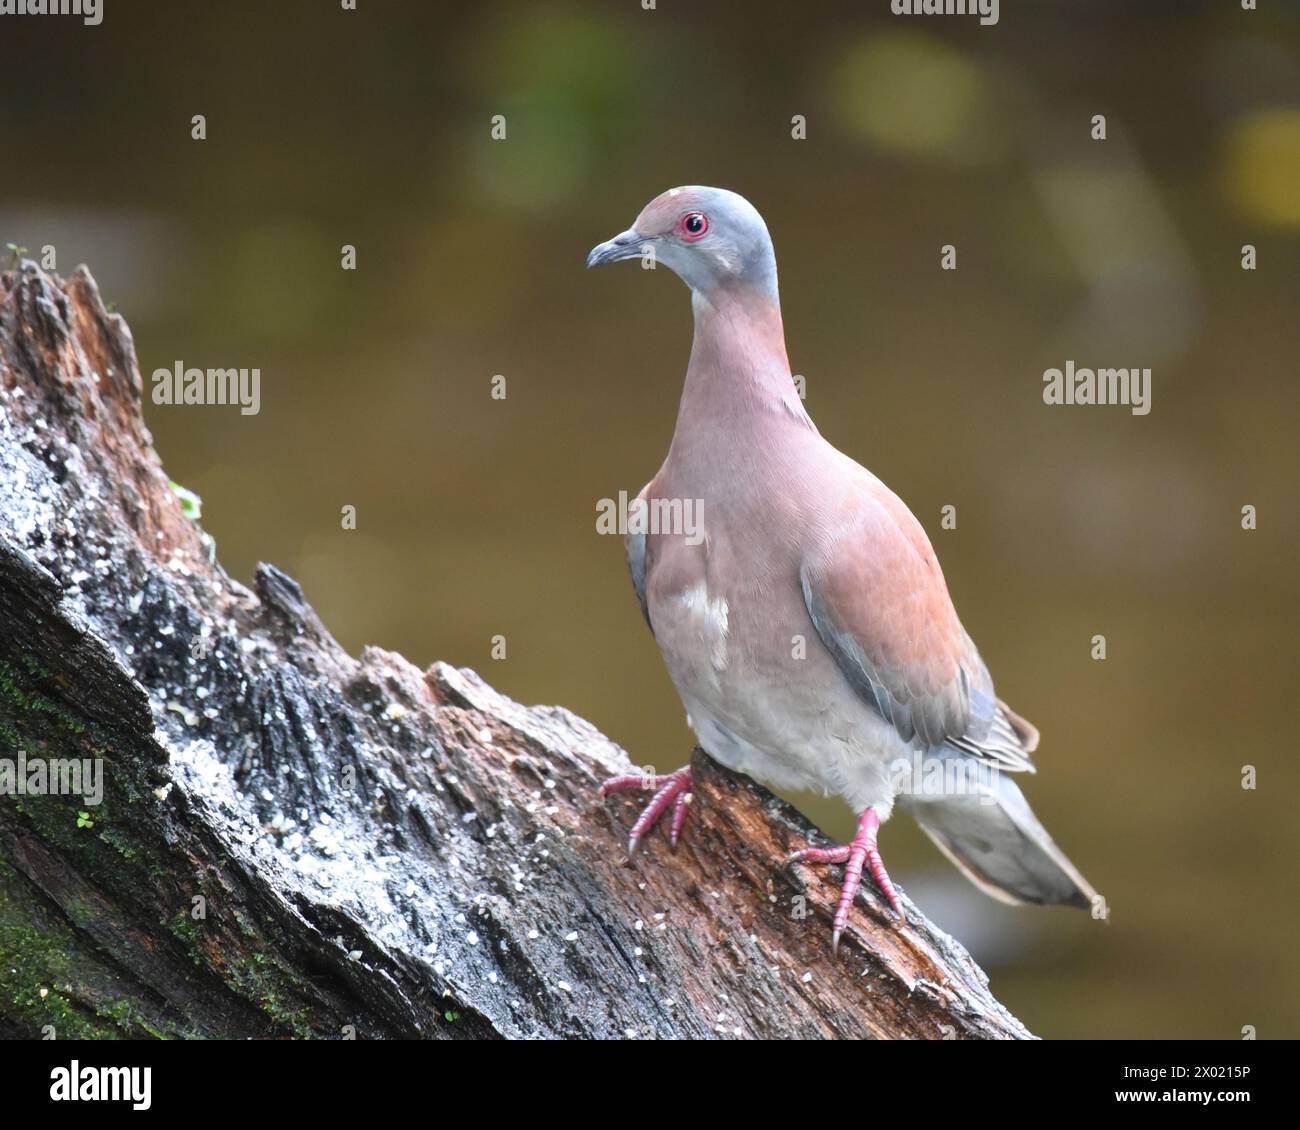 Birds of Costa Rica: Pale-vented Pigeon (Patagioenas cayennensis) Stock Photo